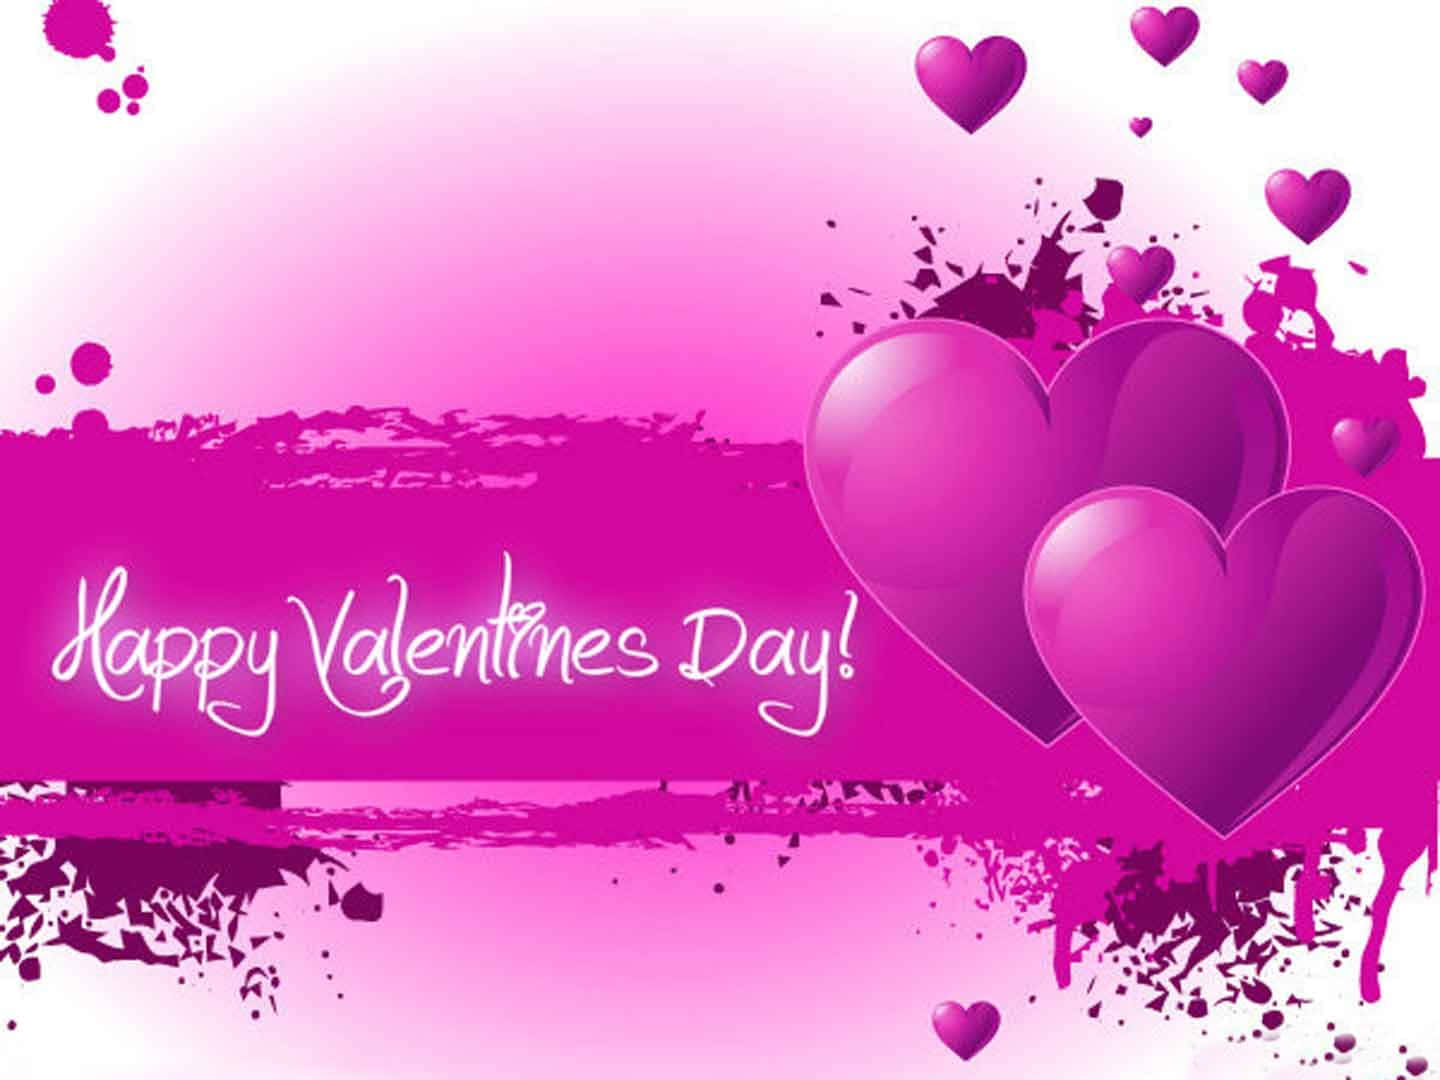 Express Love Uniquely with Pink Valentine's Day Wallpaper